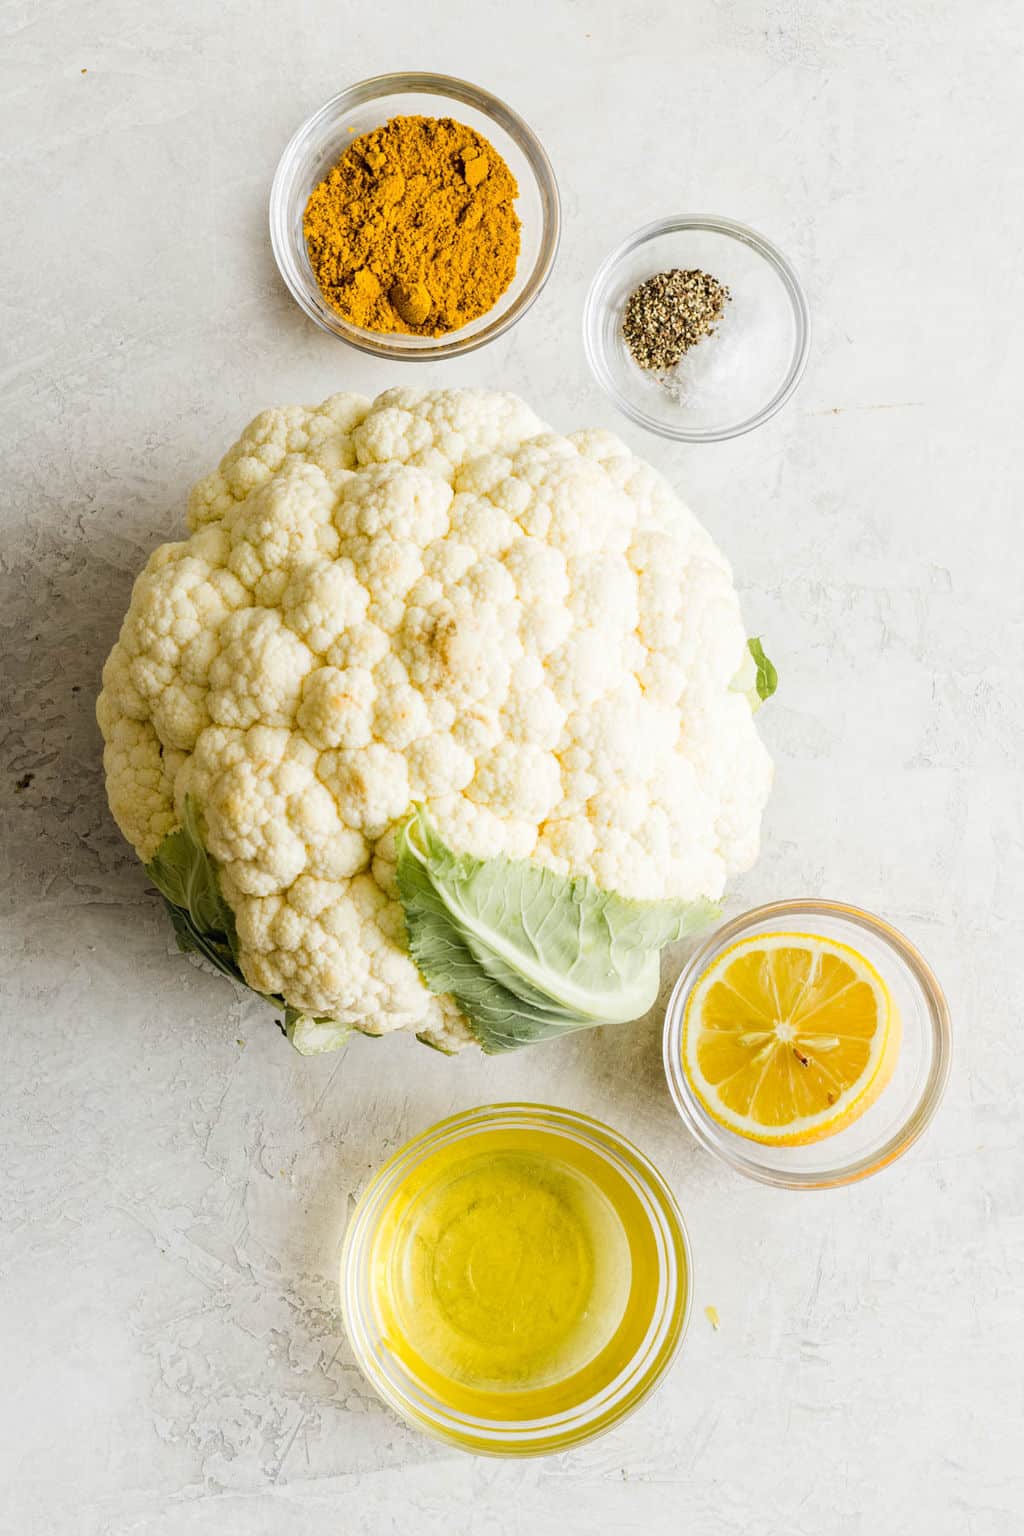 a head of cauliflower next to small glass bowls filled with oil, lemon, pepper, and yellow curry powder.